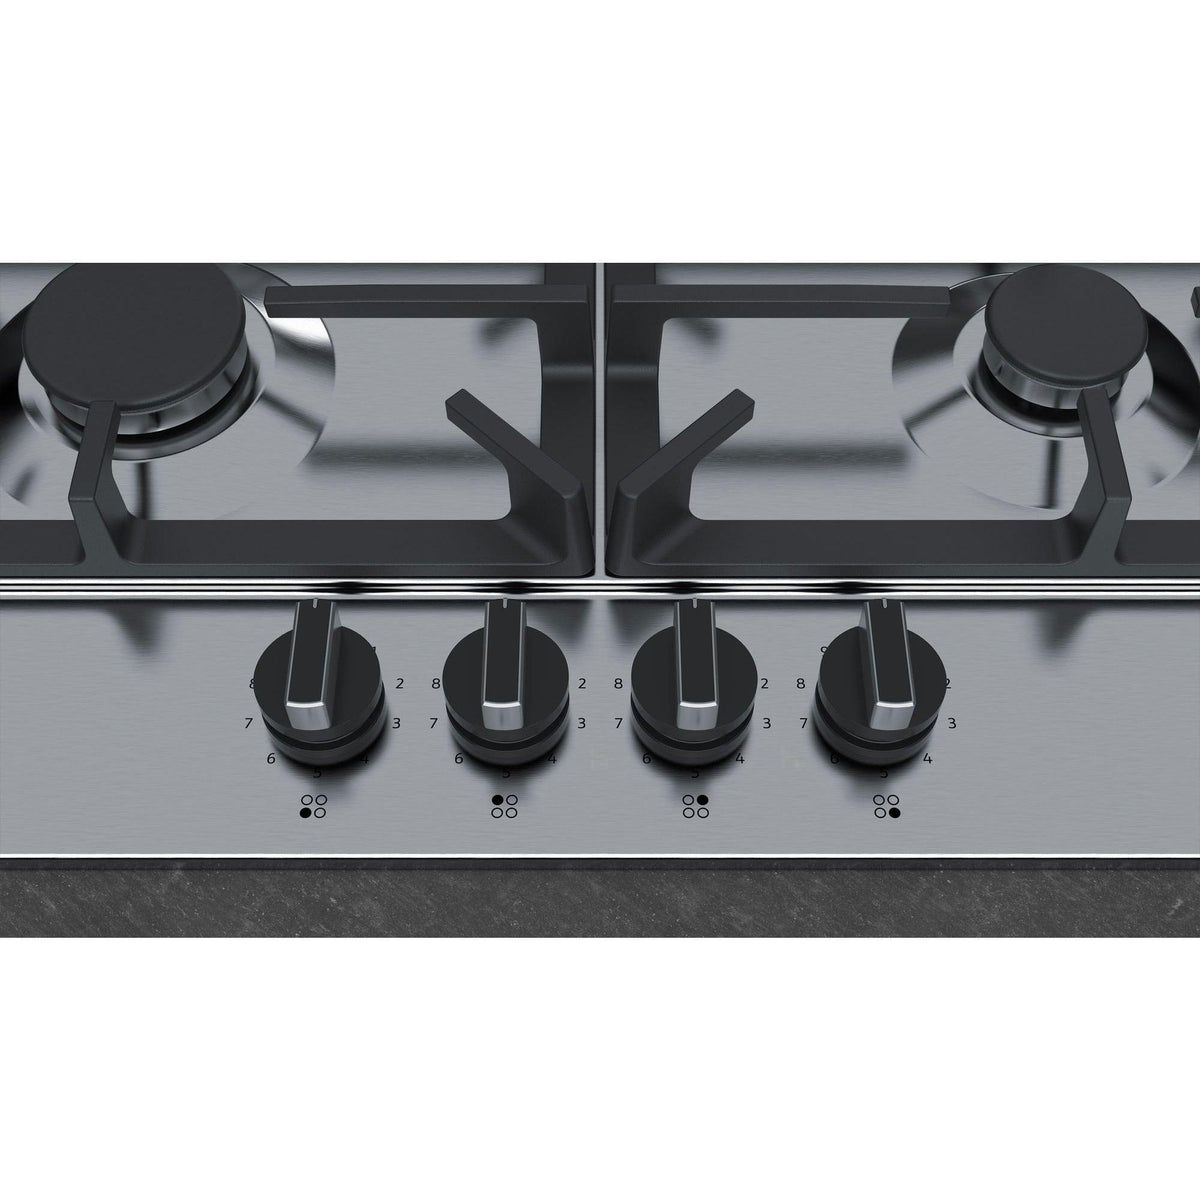 Neff 75cm 5 Burner Gas Hob - Stainless Steel | T27DS59N0 from DID Electrical - guaranteed Irish, guaranteed quality service. (6890762436796)